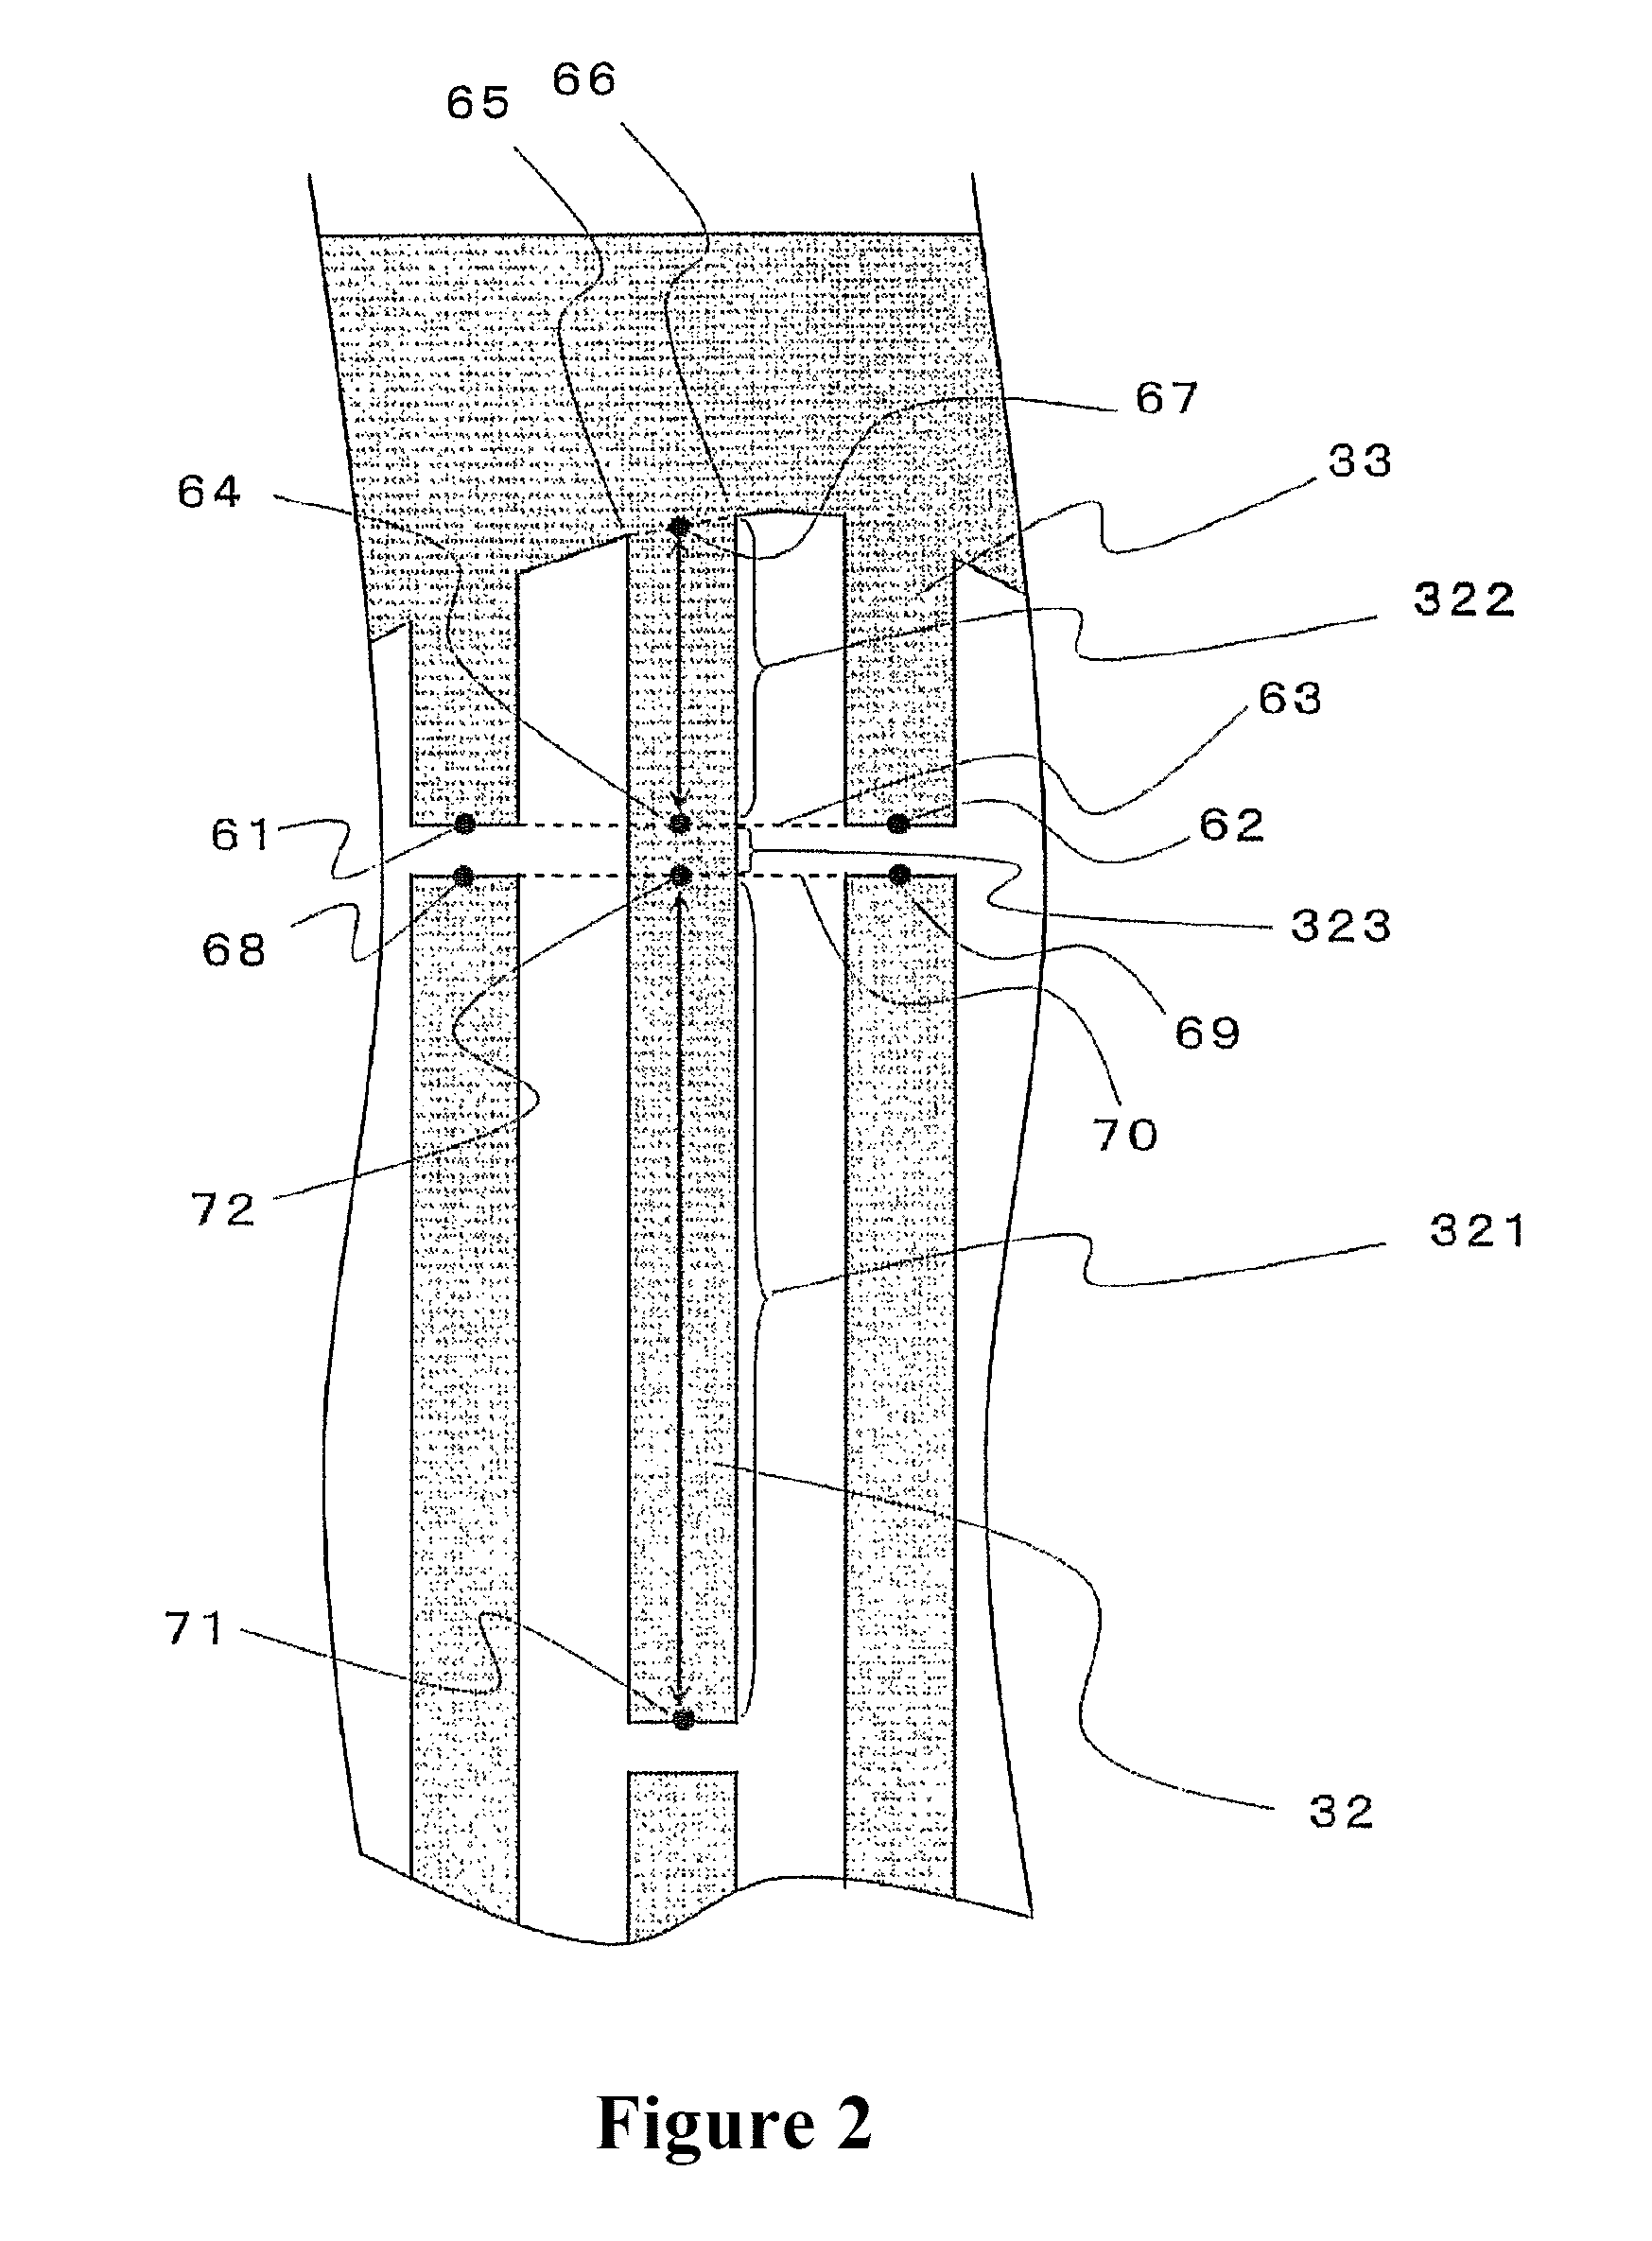 Elastic surface wave device comprising dummy electrodes